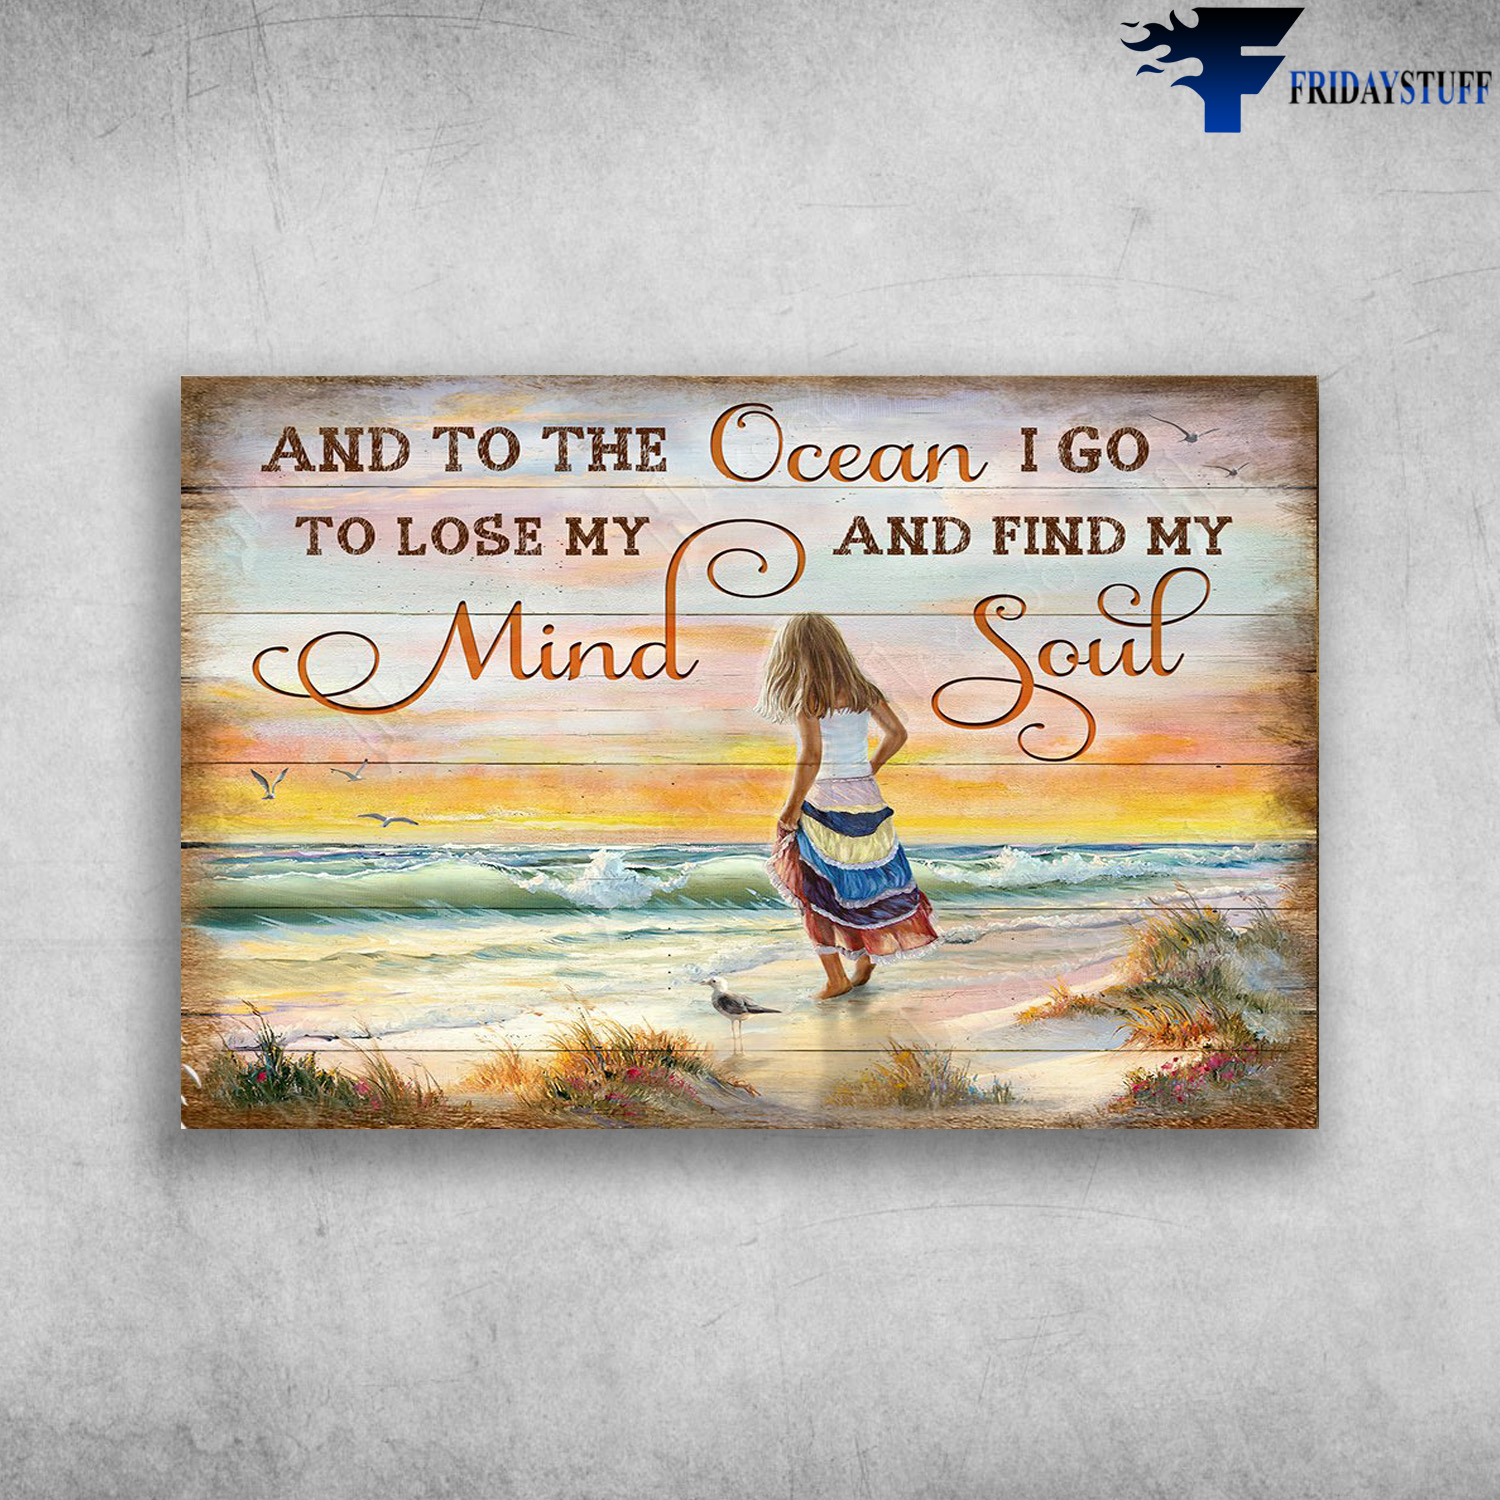 Girl On The Beach - And To The Ocean, I Go To Lose My Mine And Find My Soul